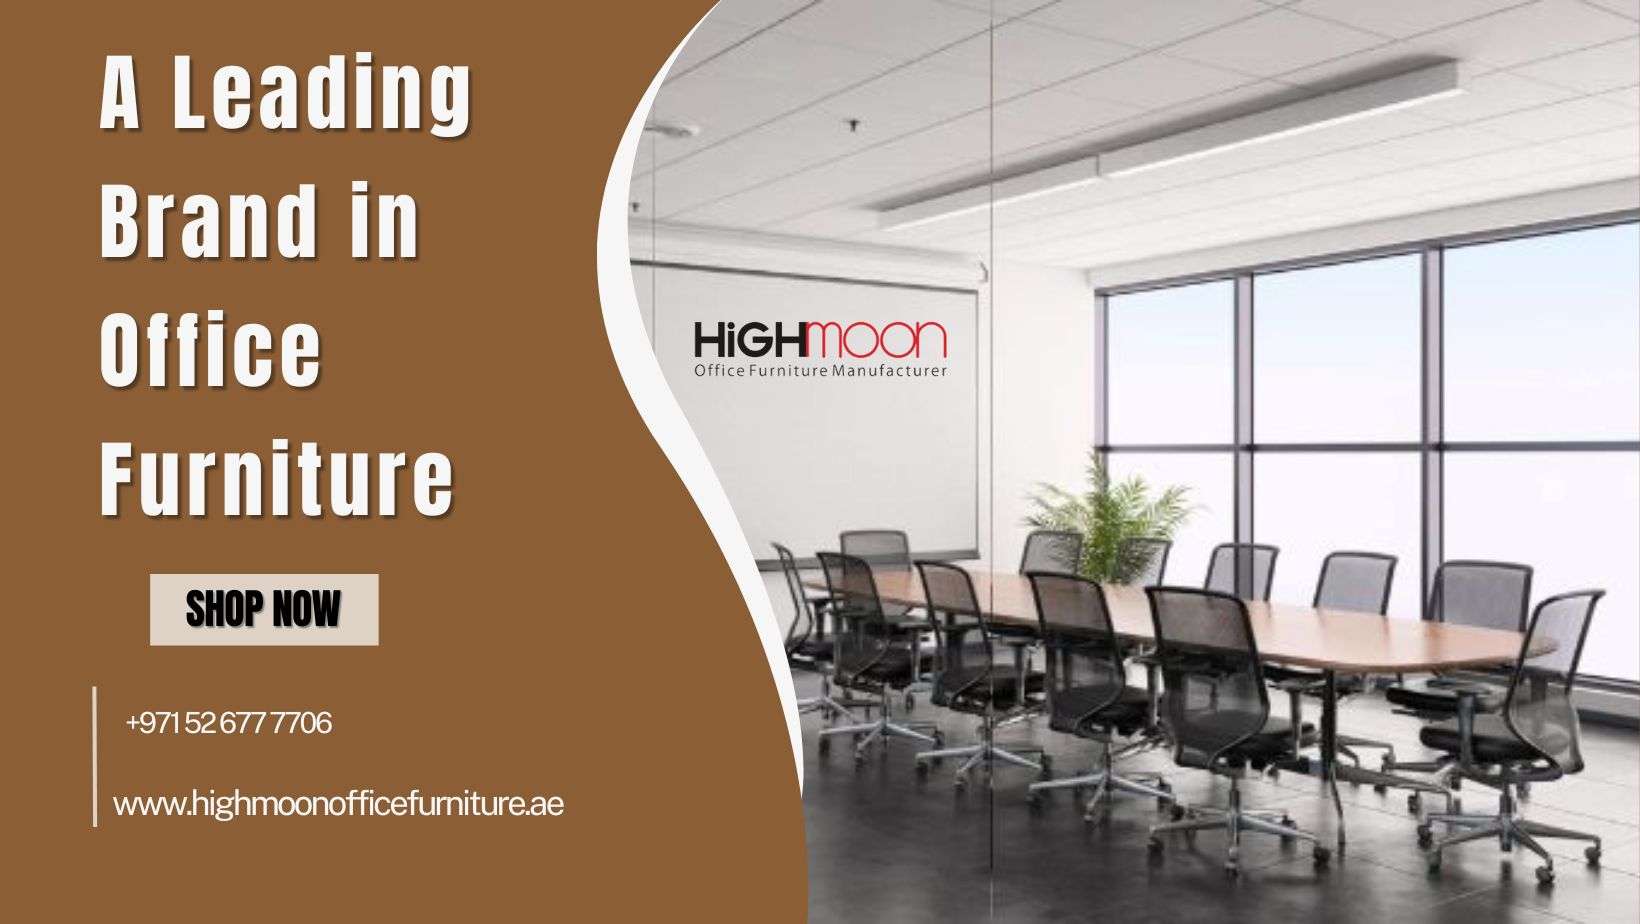 Highmoon Office Furniture A Leading Brand in Office Furniture